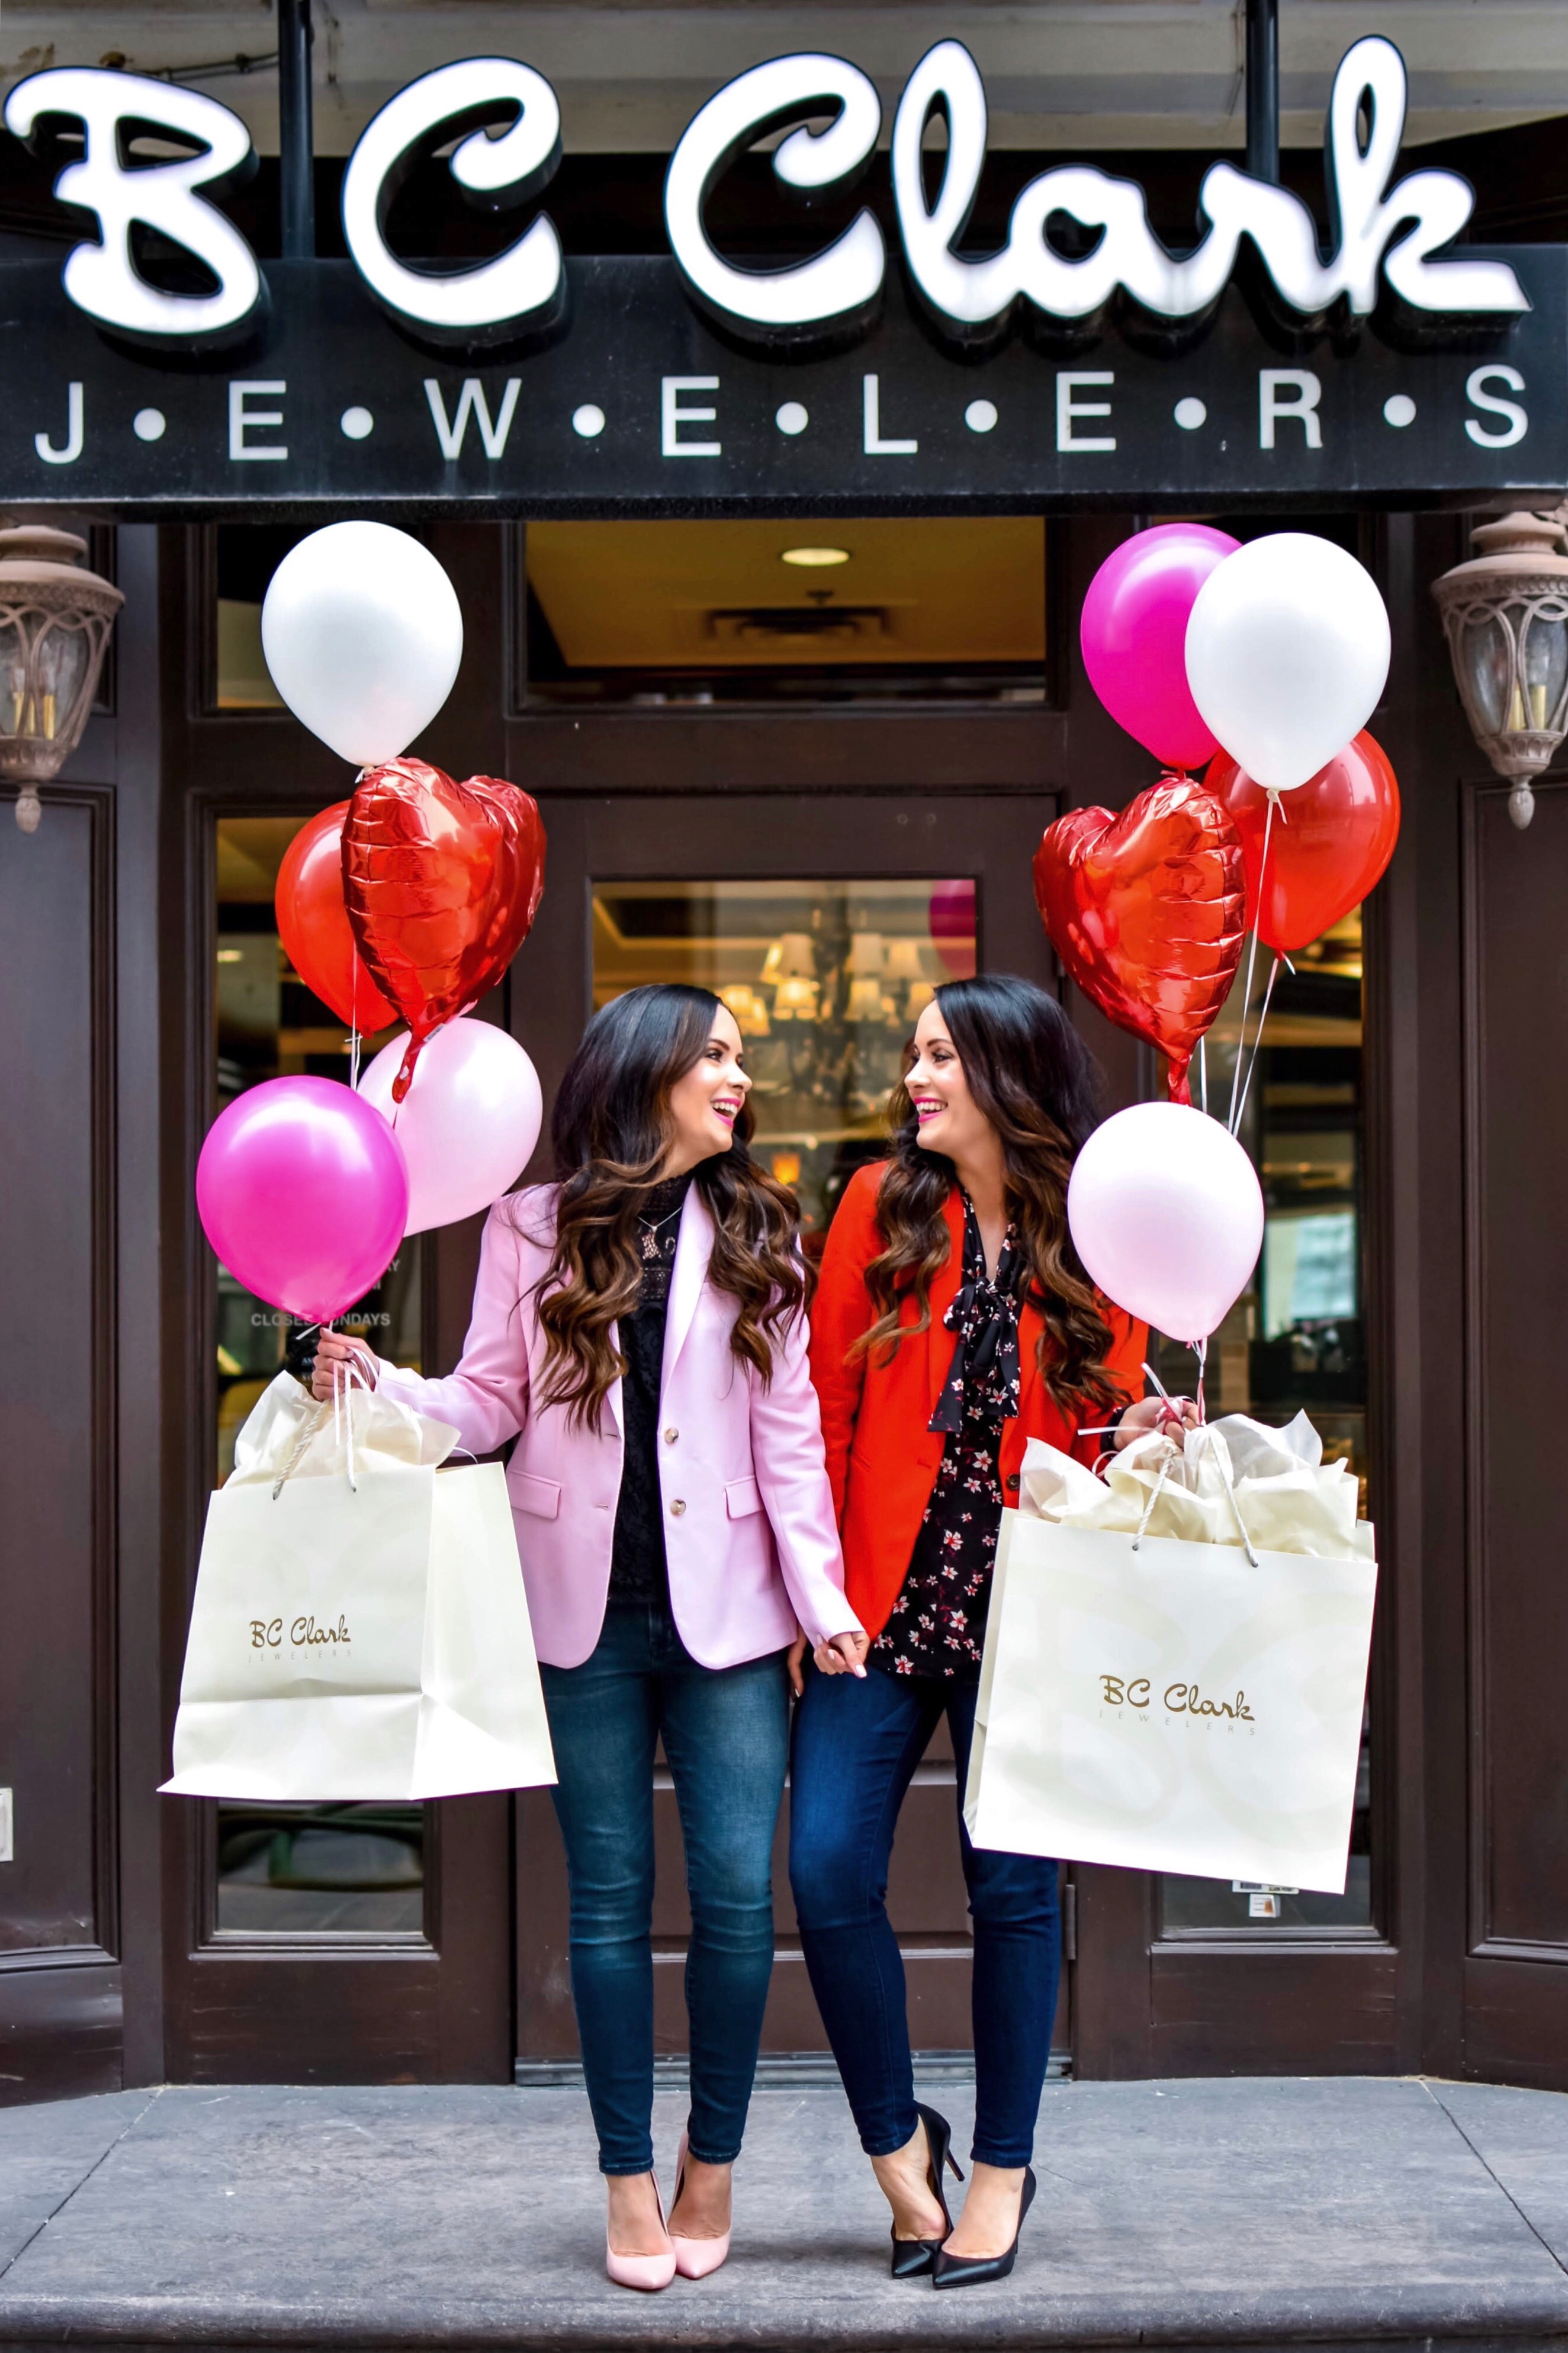 Valentines Day Jewelry Guide Gifts For Her